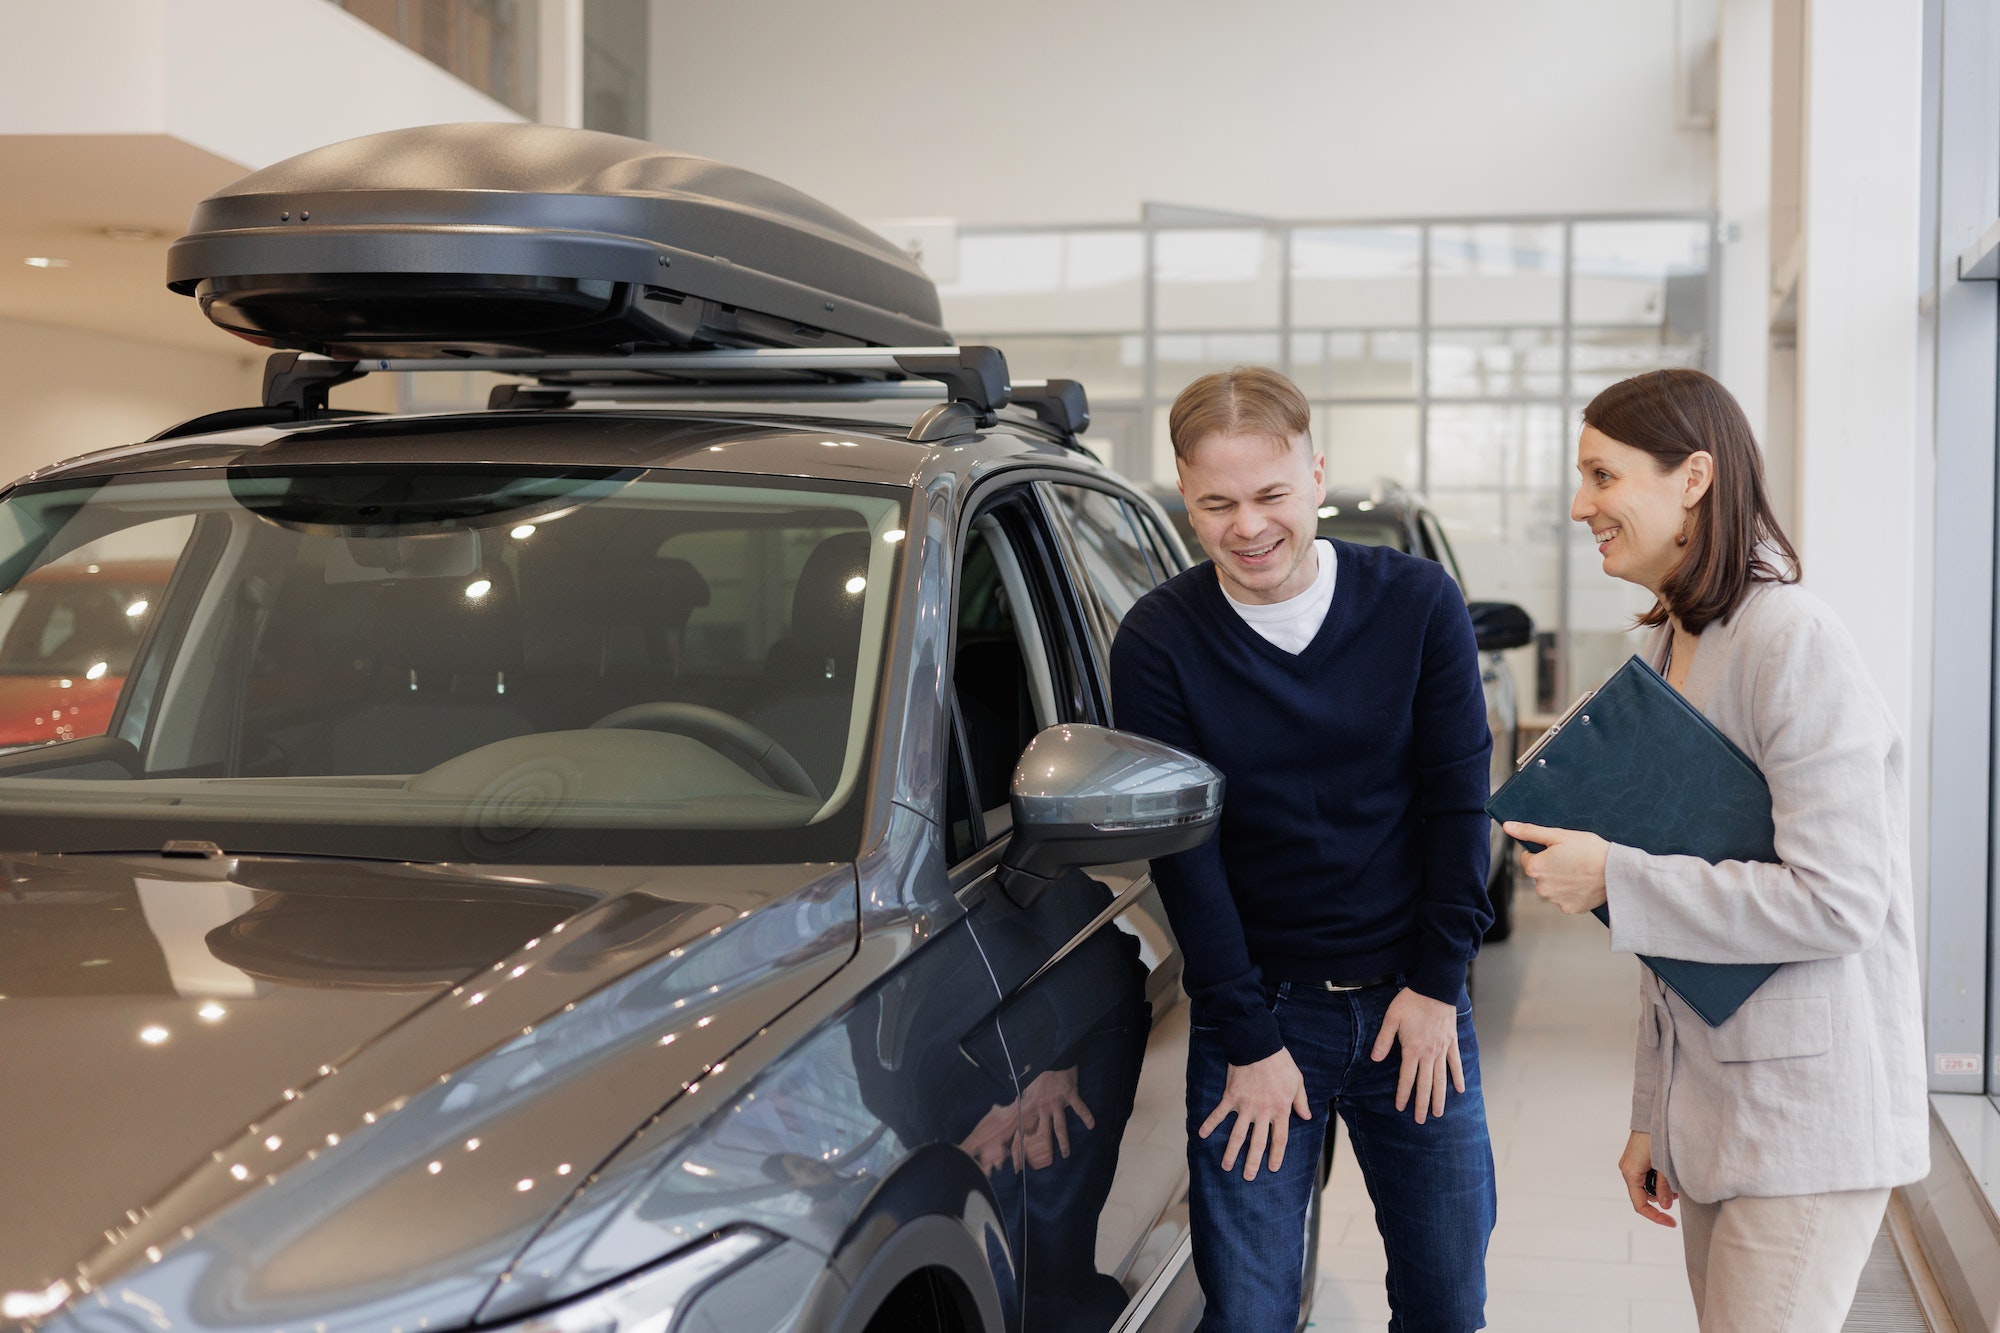 man buys a car at a car dealership. A female salesperson and car rental helps with the purchase